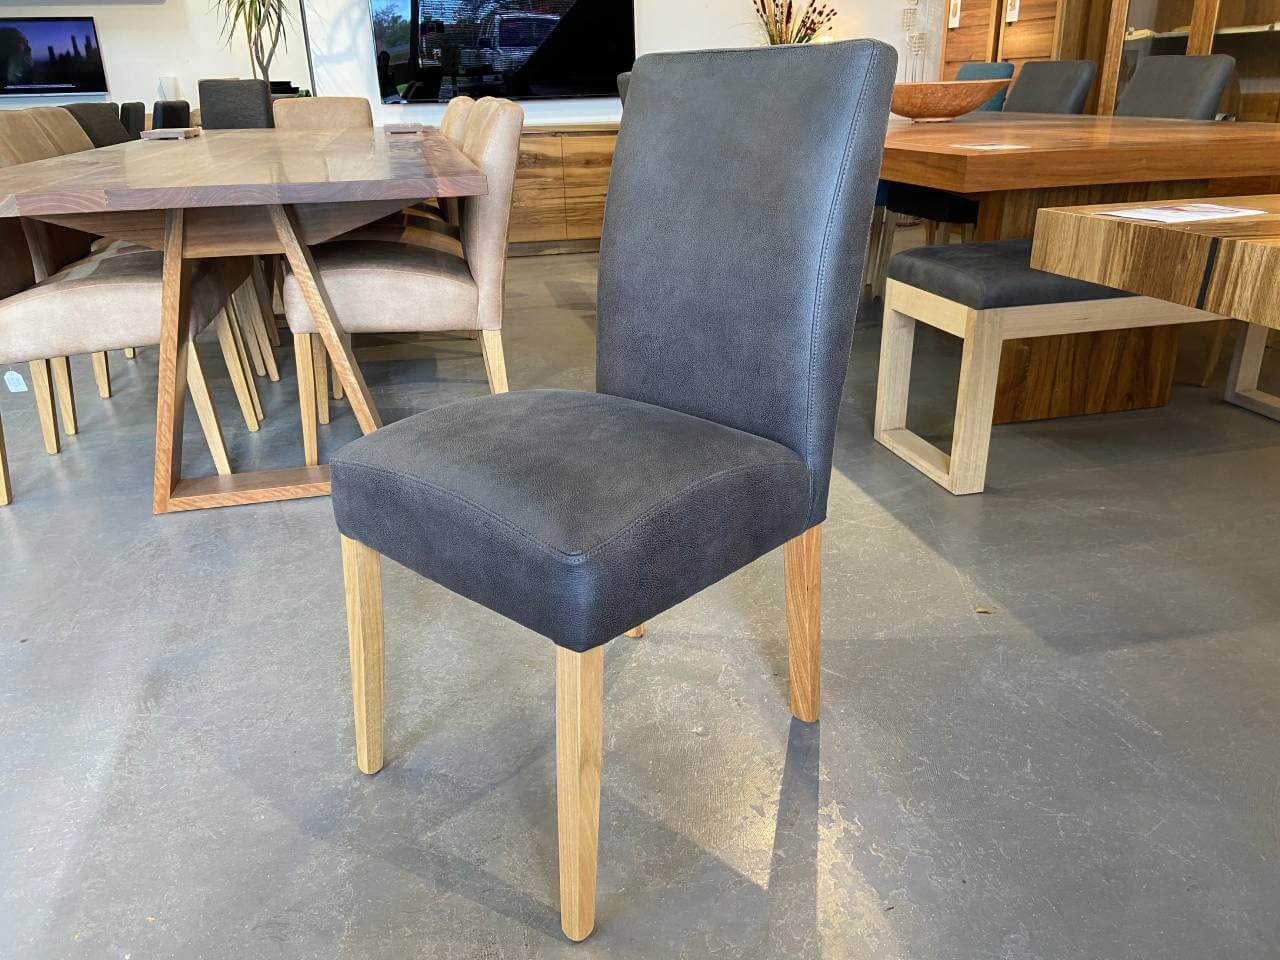 Bendigo Upholstered Dining Chairs Warwick Eastwood Slate Fabric Oak Timber Made in Adelaide, South Australia